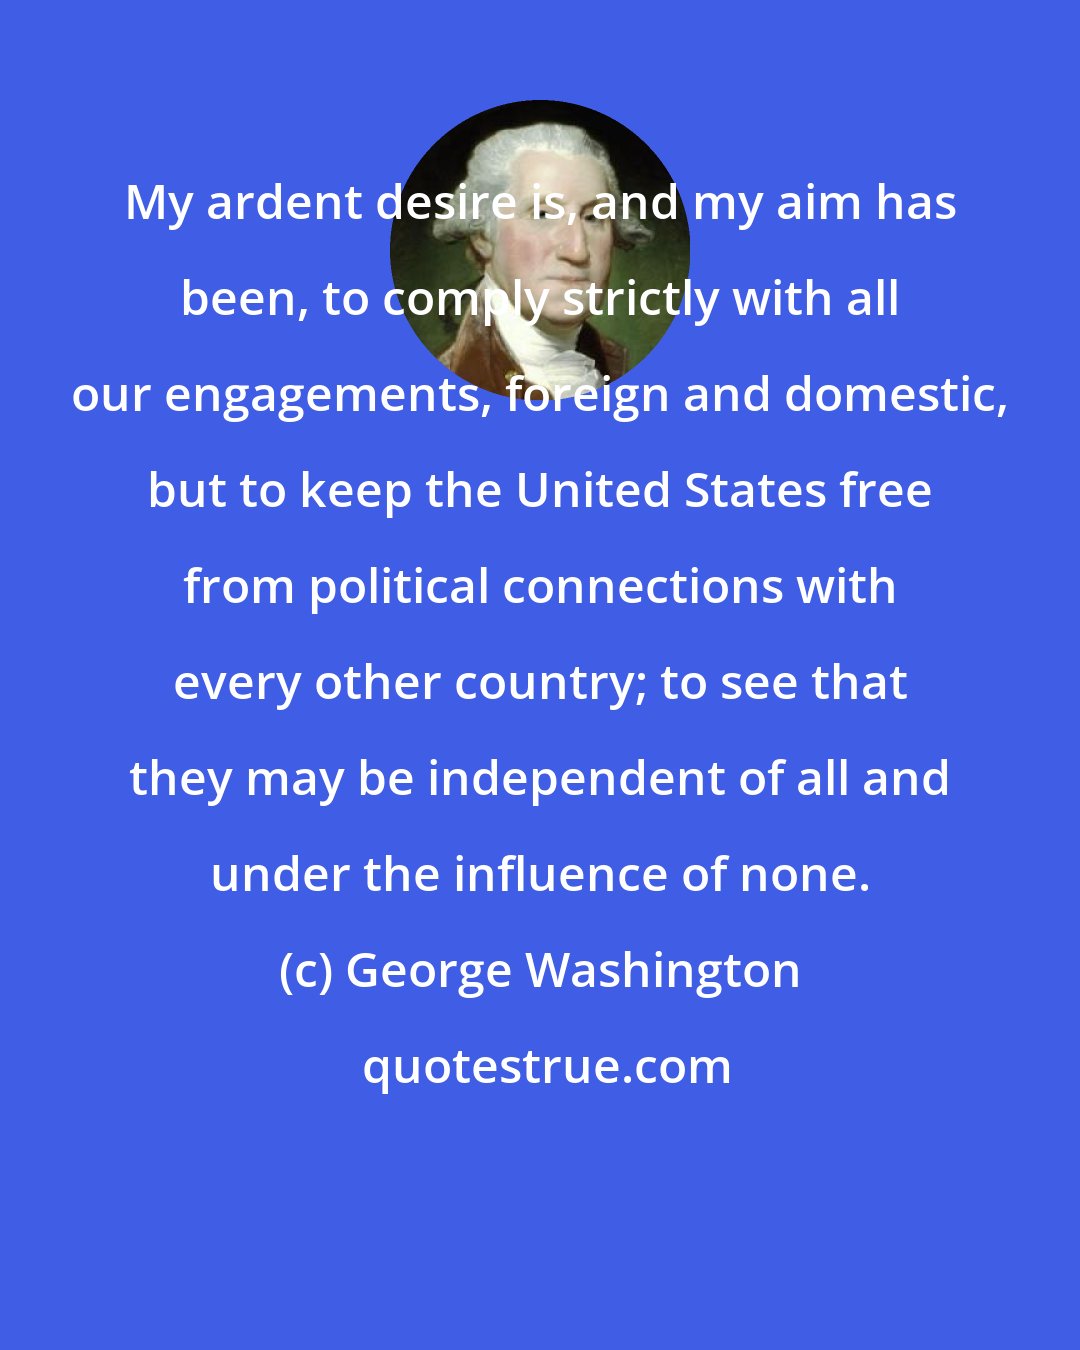 George Washington: My ardent desire is, and my aim has been, to comply strictly with all our engagements, foreign and domestic, but to keep the United States free from political connections with every other country; to see that they may be independent of all and under the influence of none.